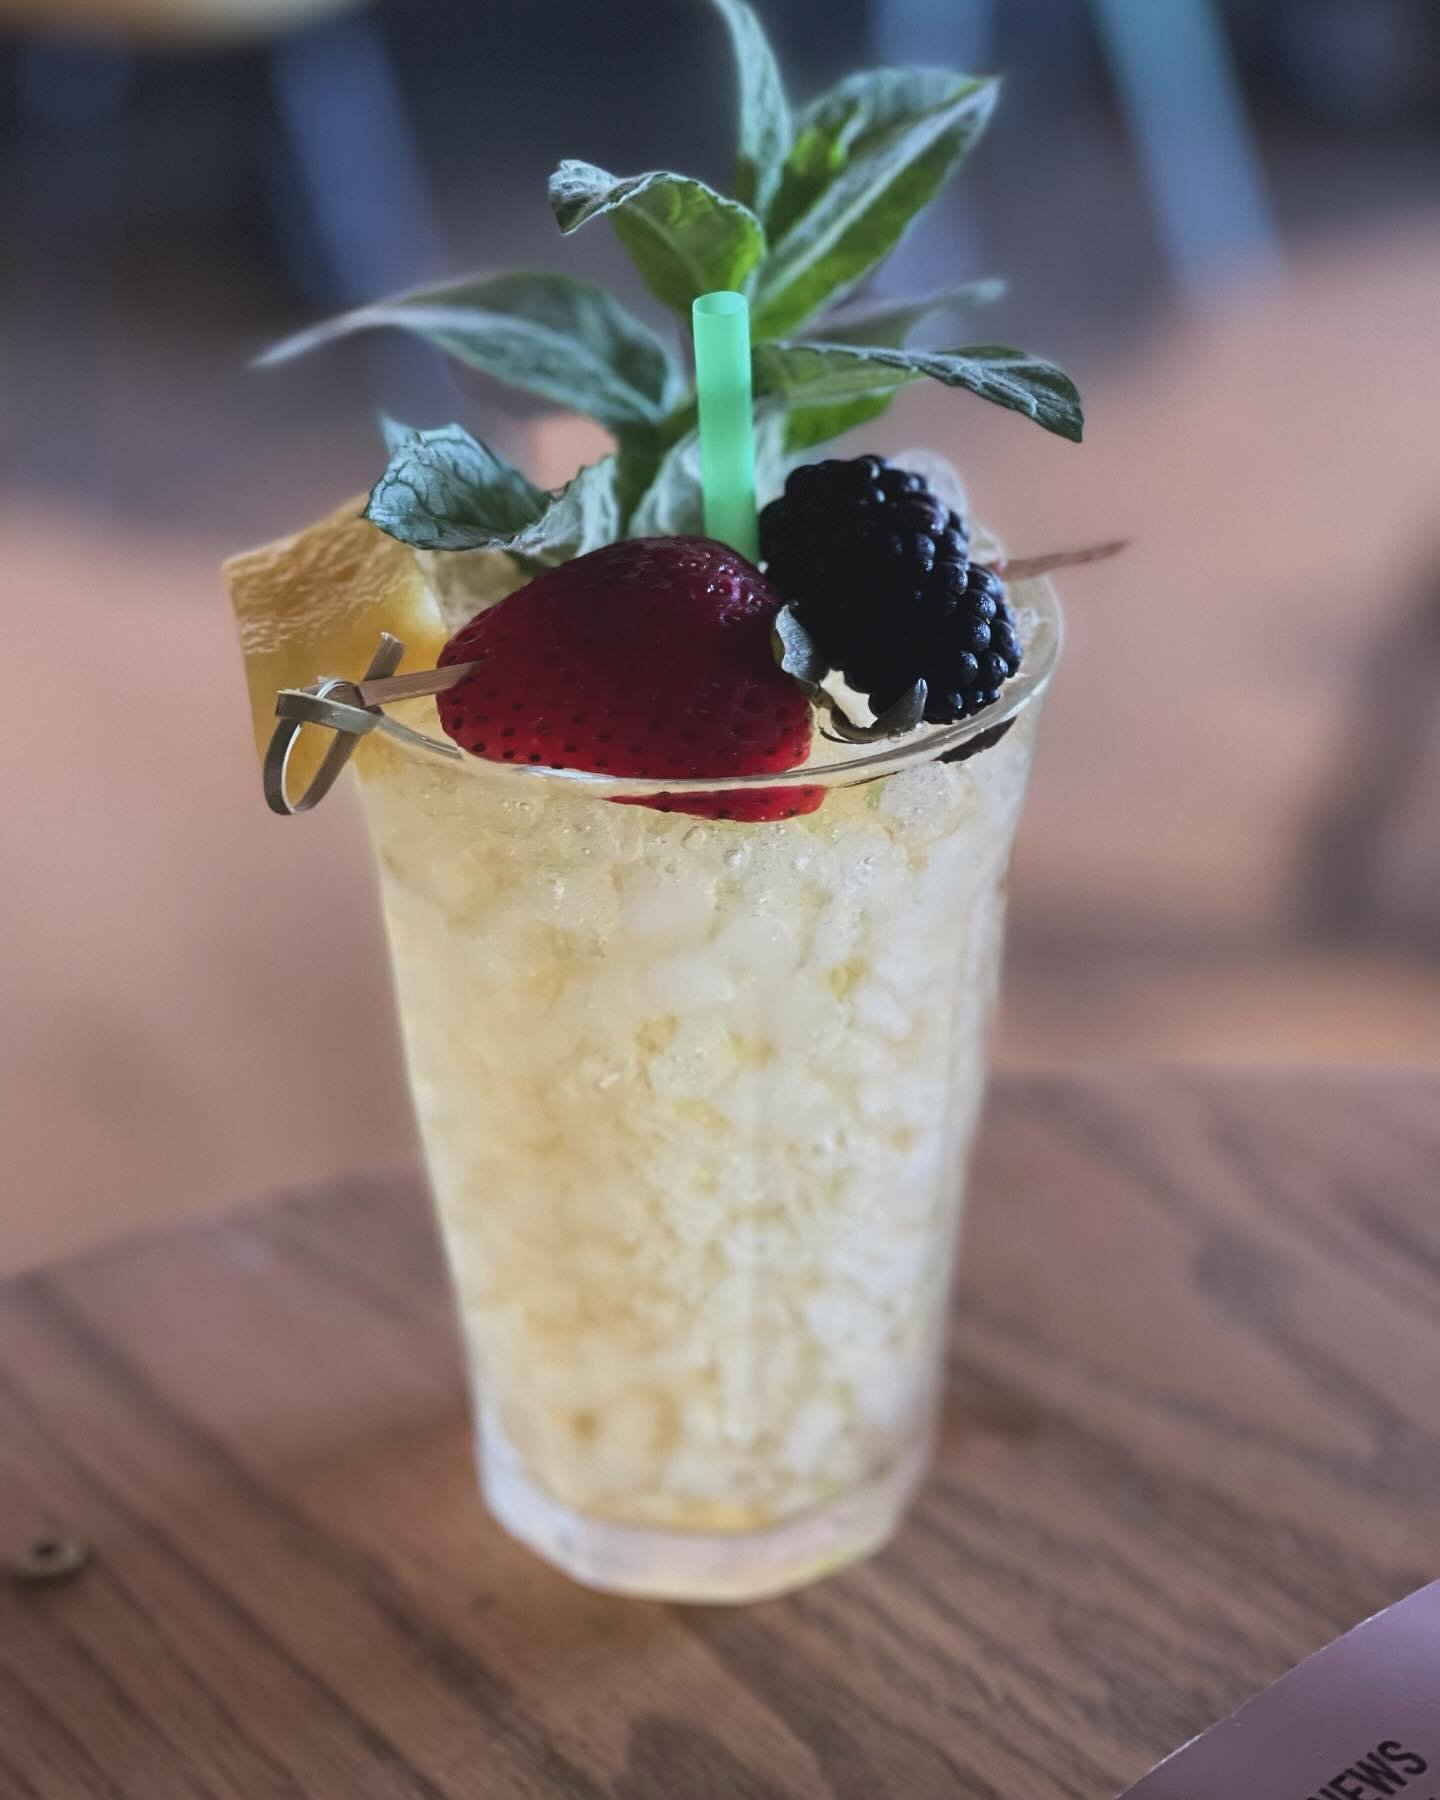 If there was ever a day to eskew our anti-garnish philosophy, it would certainly be #derbyday. Thus: the Fancy Julep! And in our case, we are deviating from the norm and making a mash-up of historical Juleps today!

Doug used to make these at a fancy